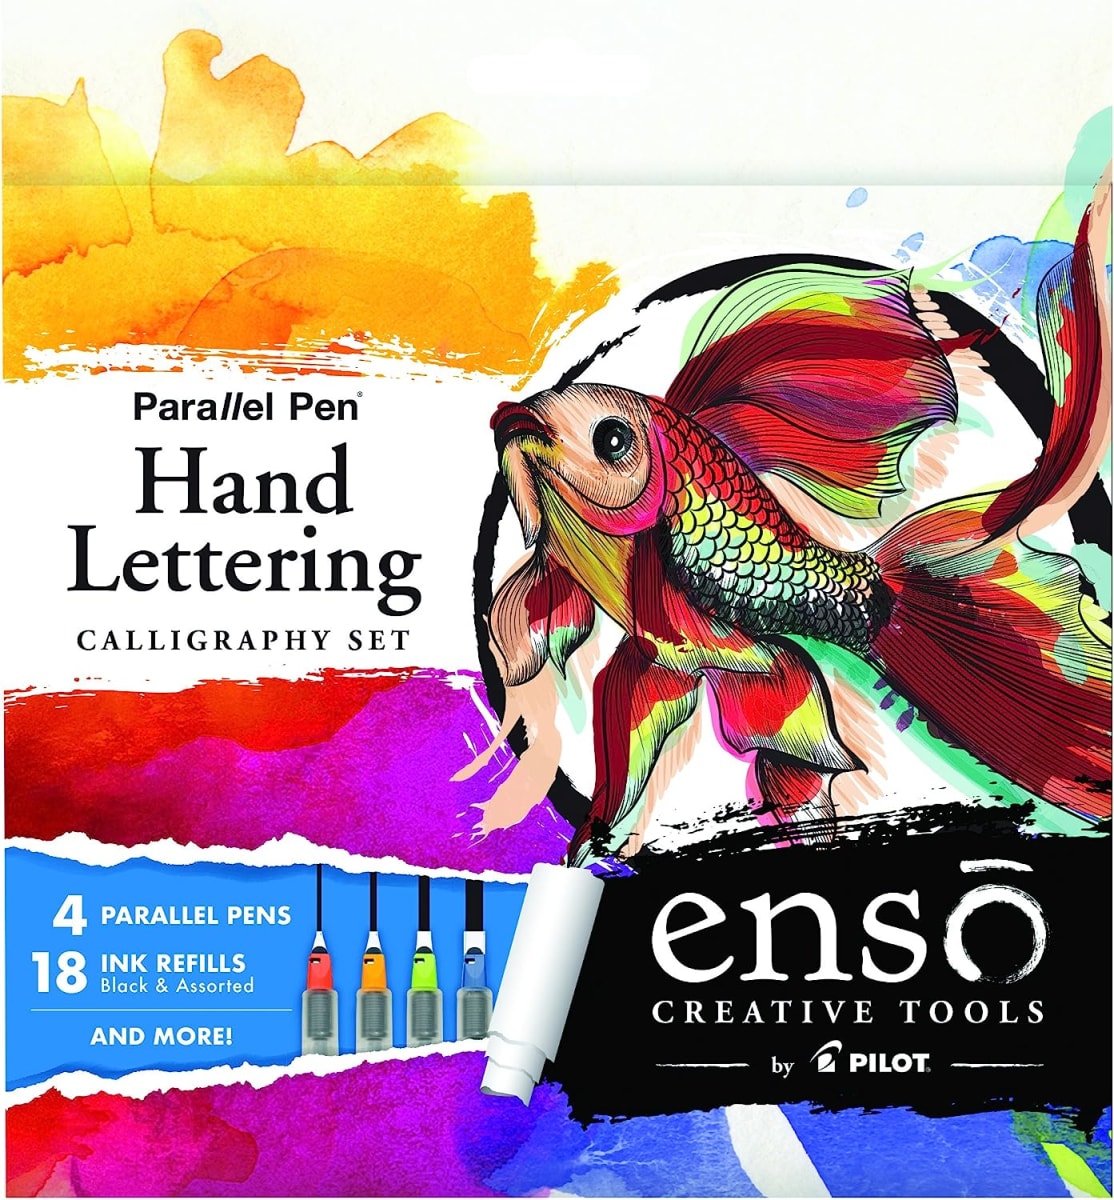 Enso Parallel Pen Hand Lettering Calligraphy Set